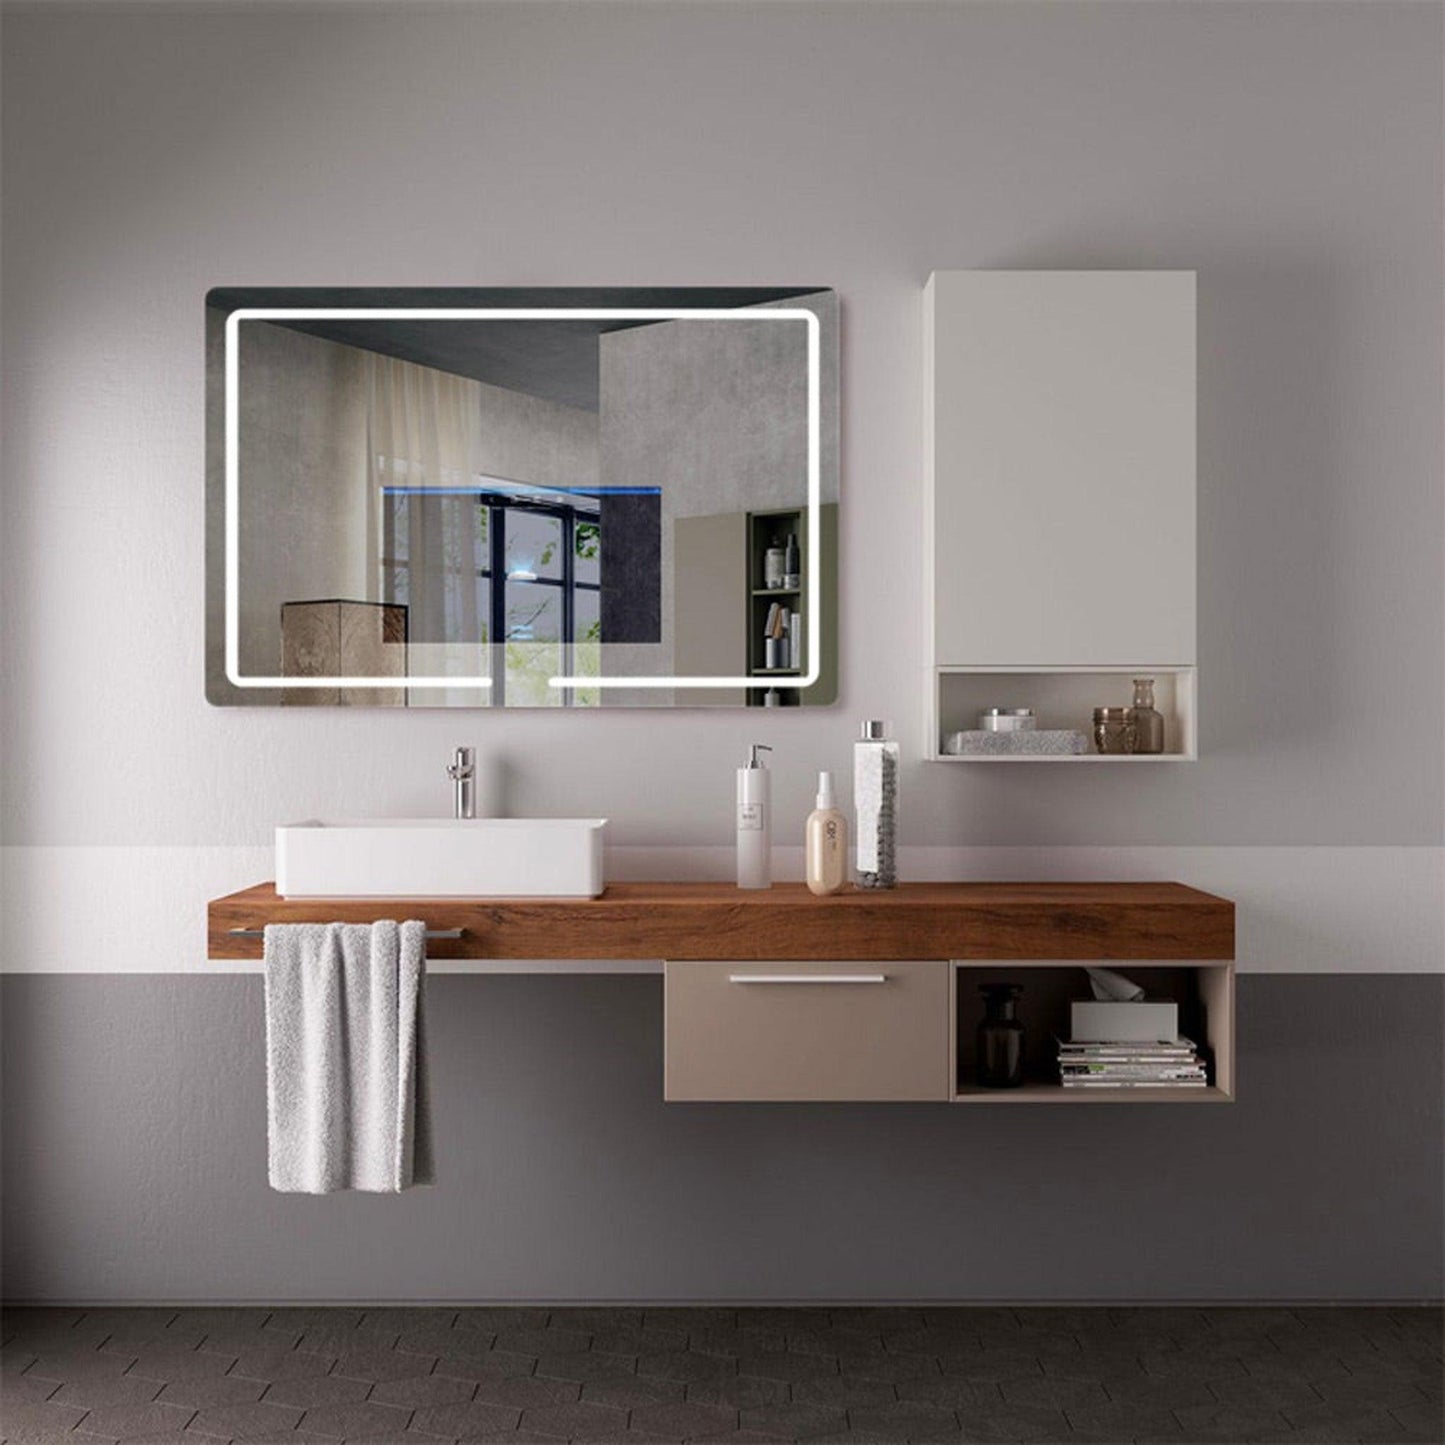 Aquadom Vision 48" x 32" Smart LED Lighted Bathroom Mirror With Built-in TV, Defogger, Body Fat Scale and Skin Detector